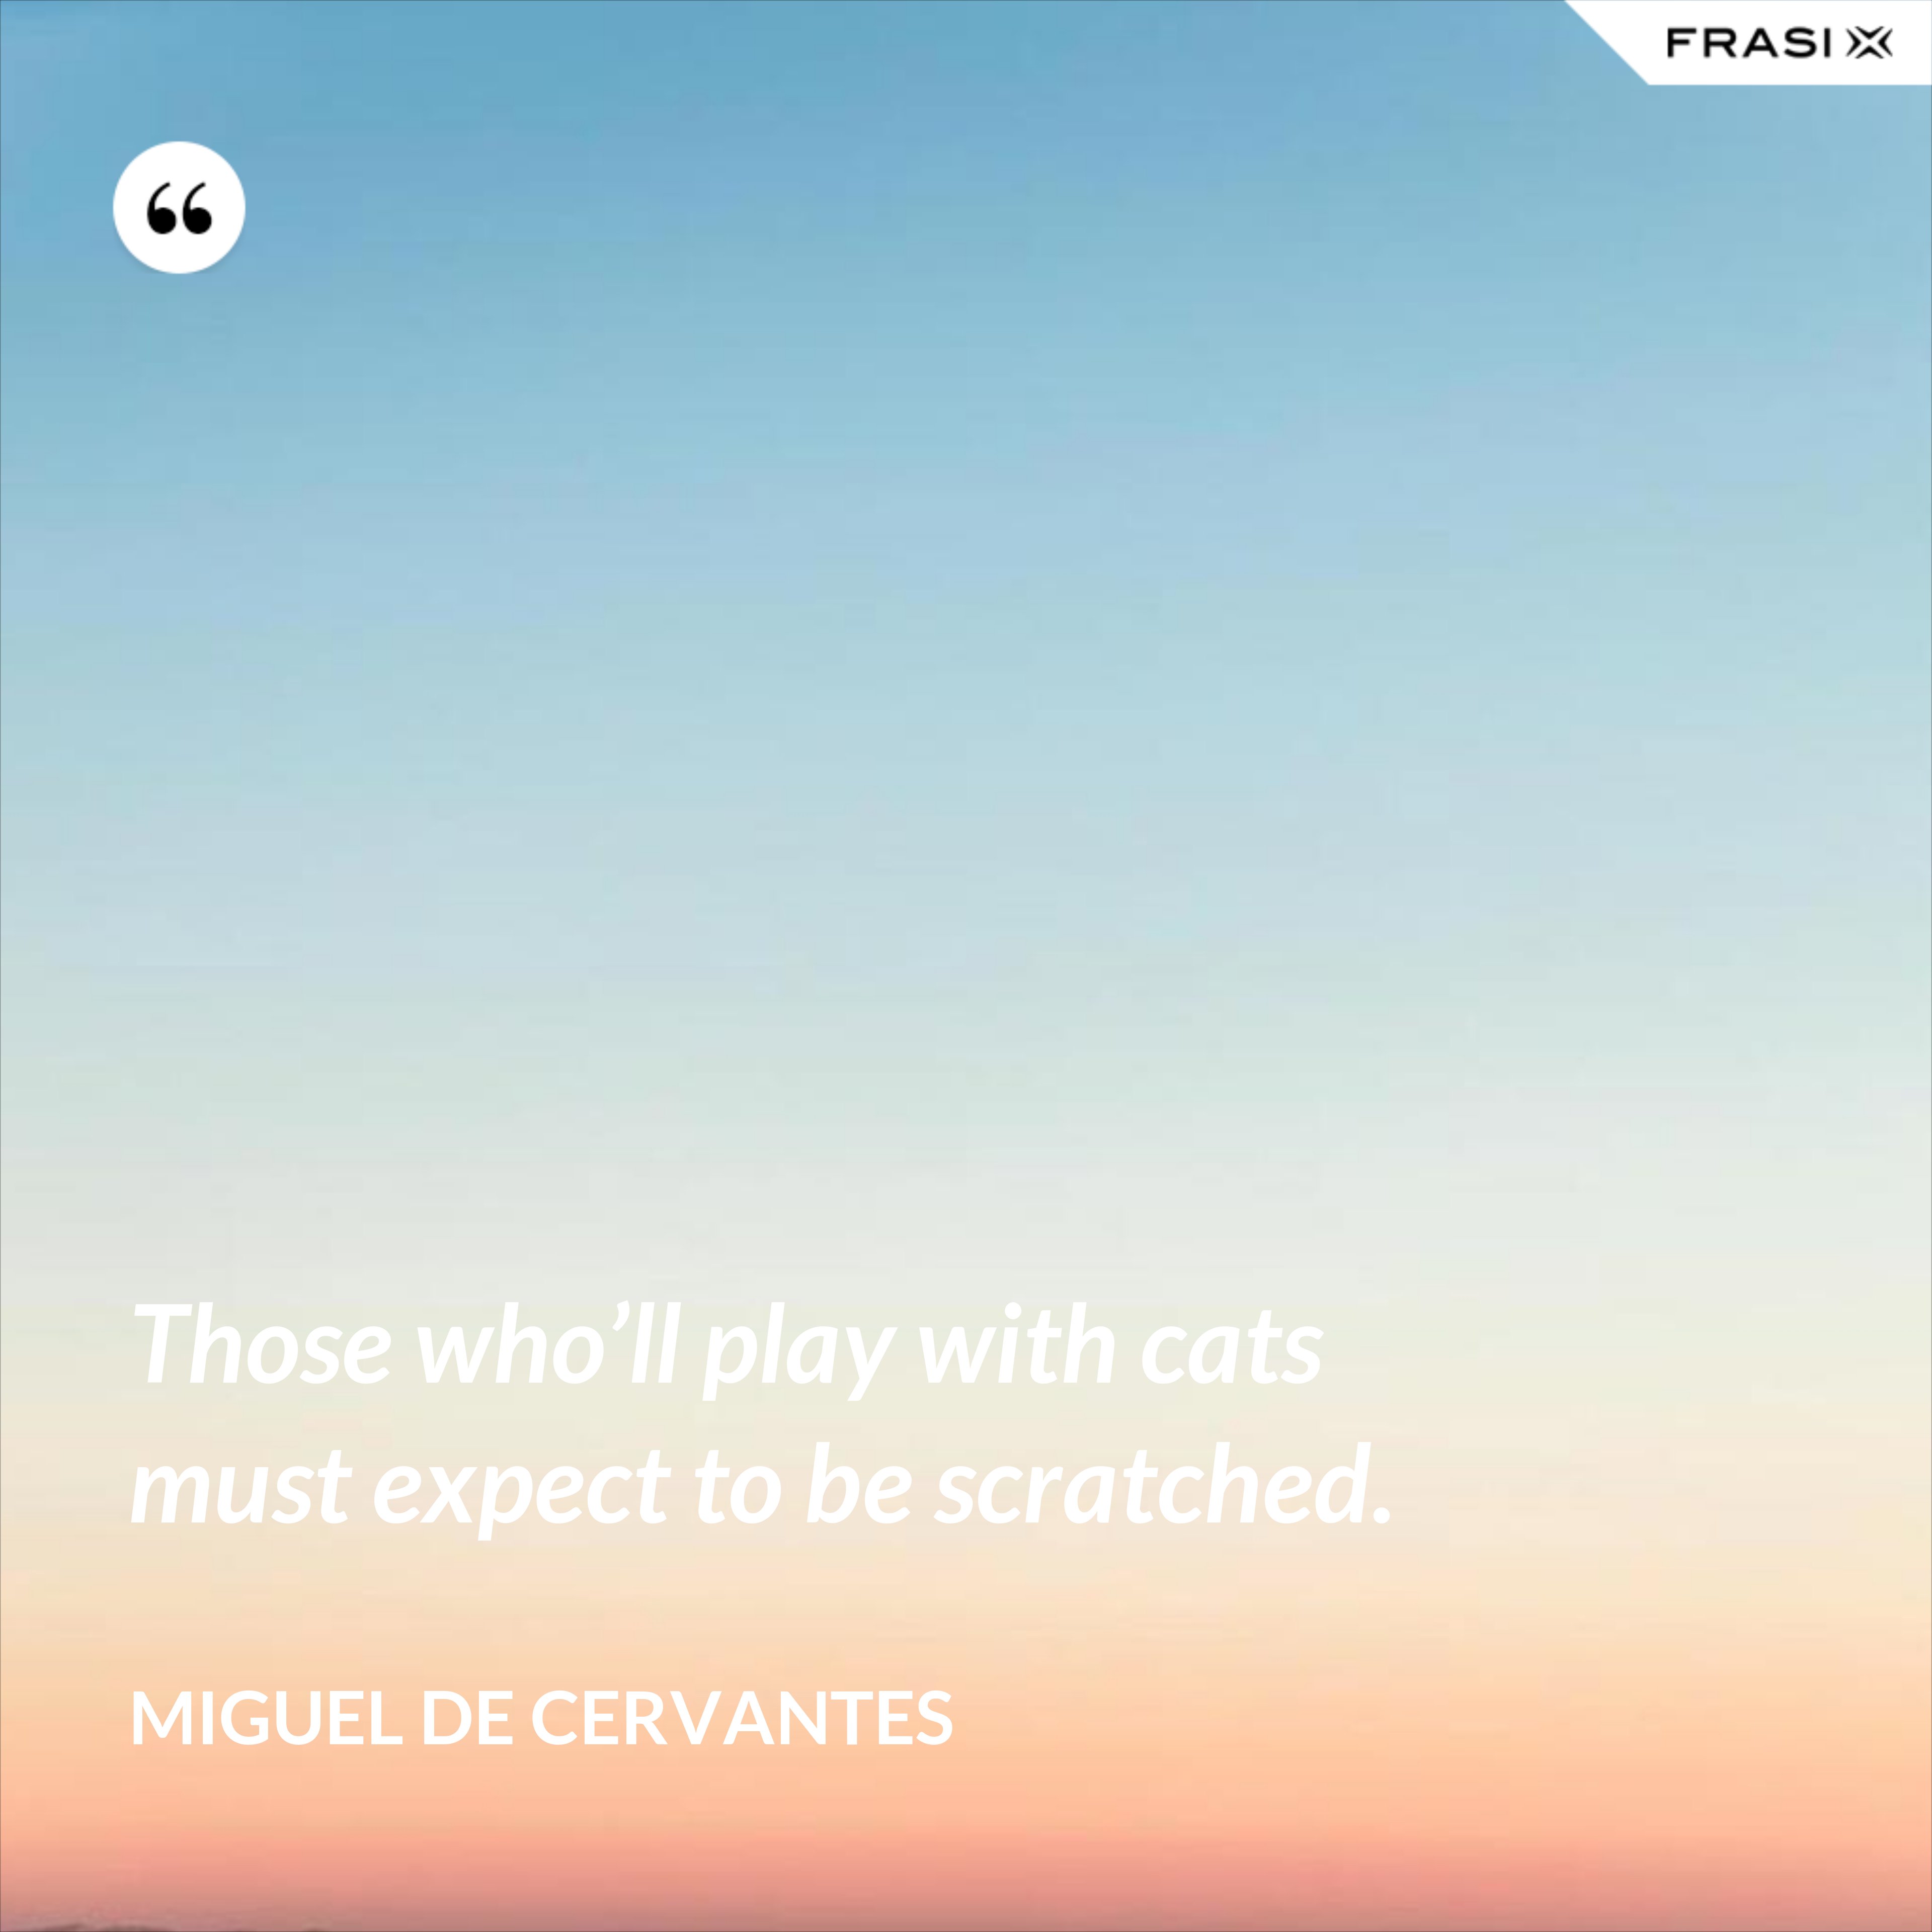 Those who’ll play with cats must expect to be scratched. - Miguel de Cervantes